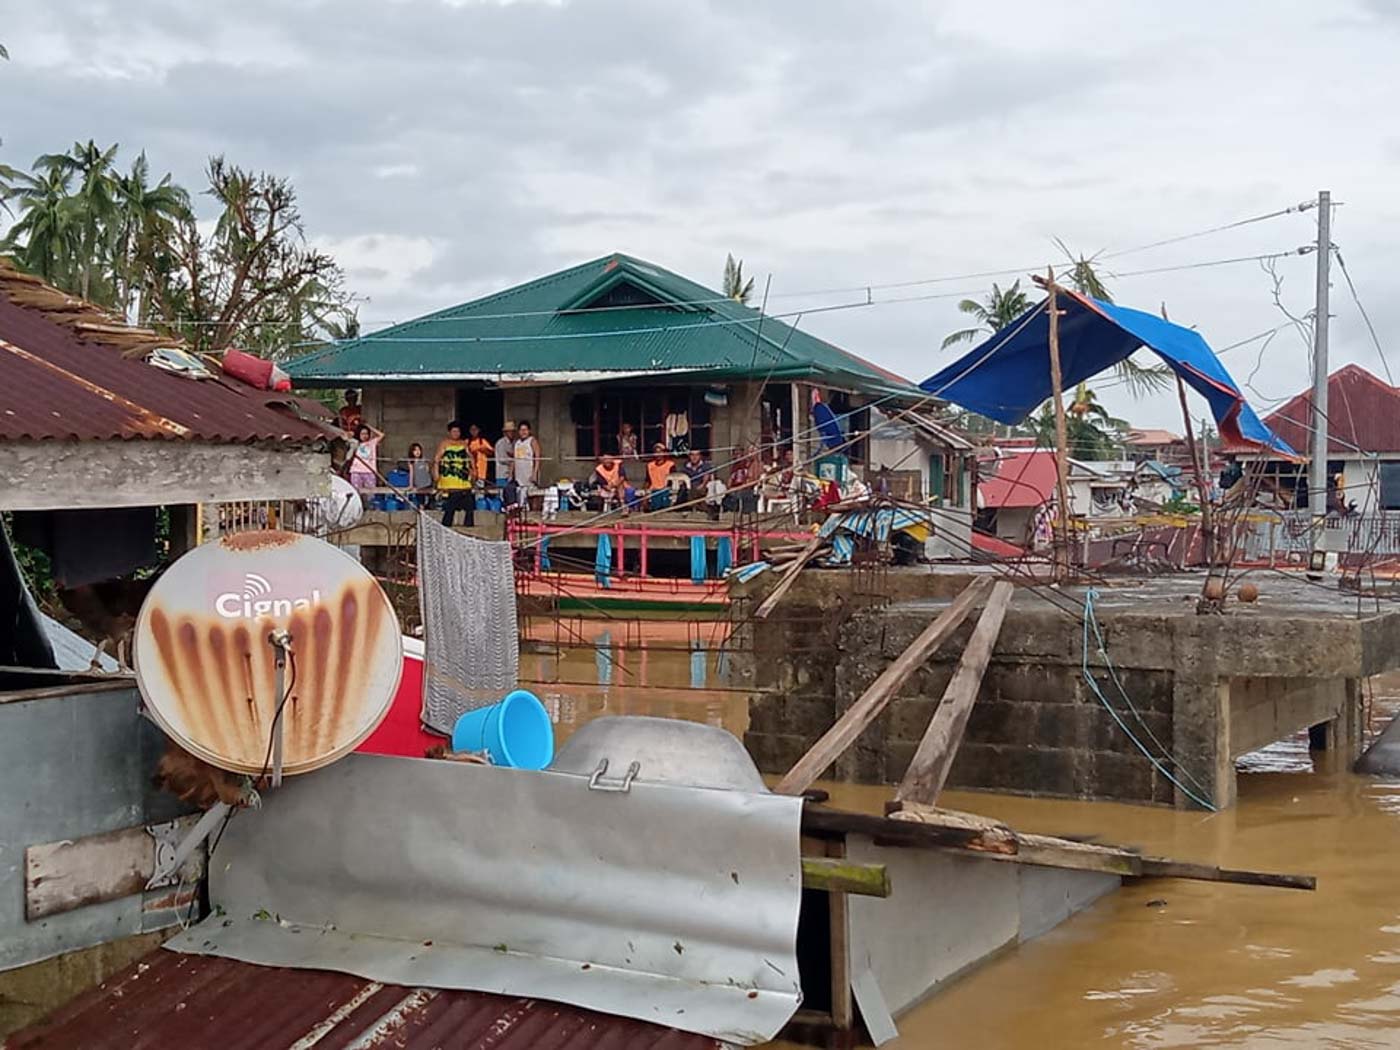 FLOODED. Several barangays in the municipality of Oras, Eastern Samar get flooded following the landfall of Typhoon Ambo on Thursday, April 14. Photo from Oras Mayor Viviane Alvarez 